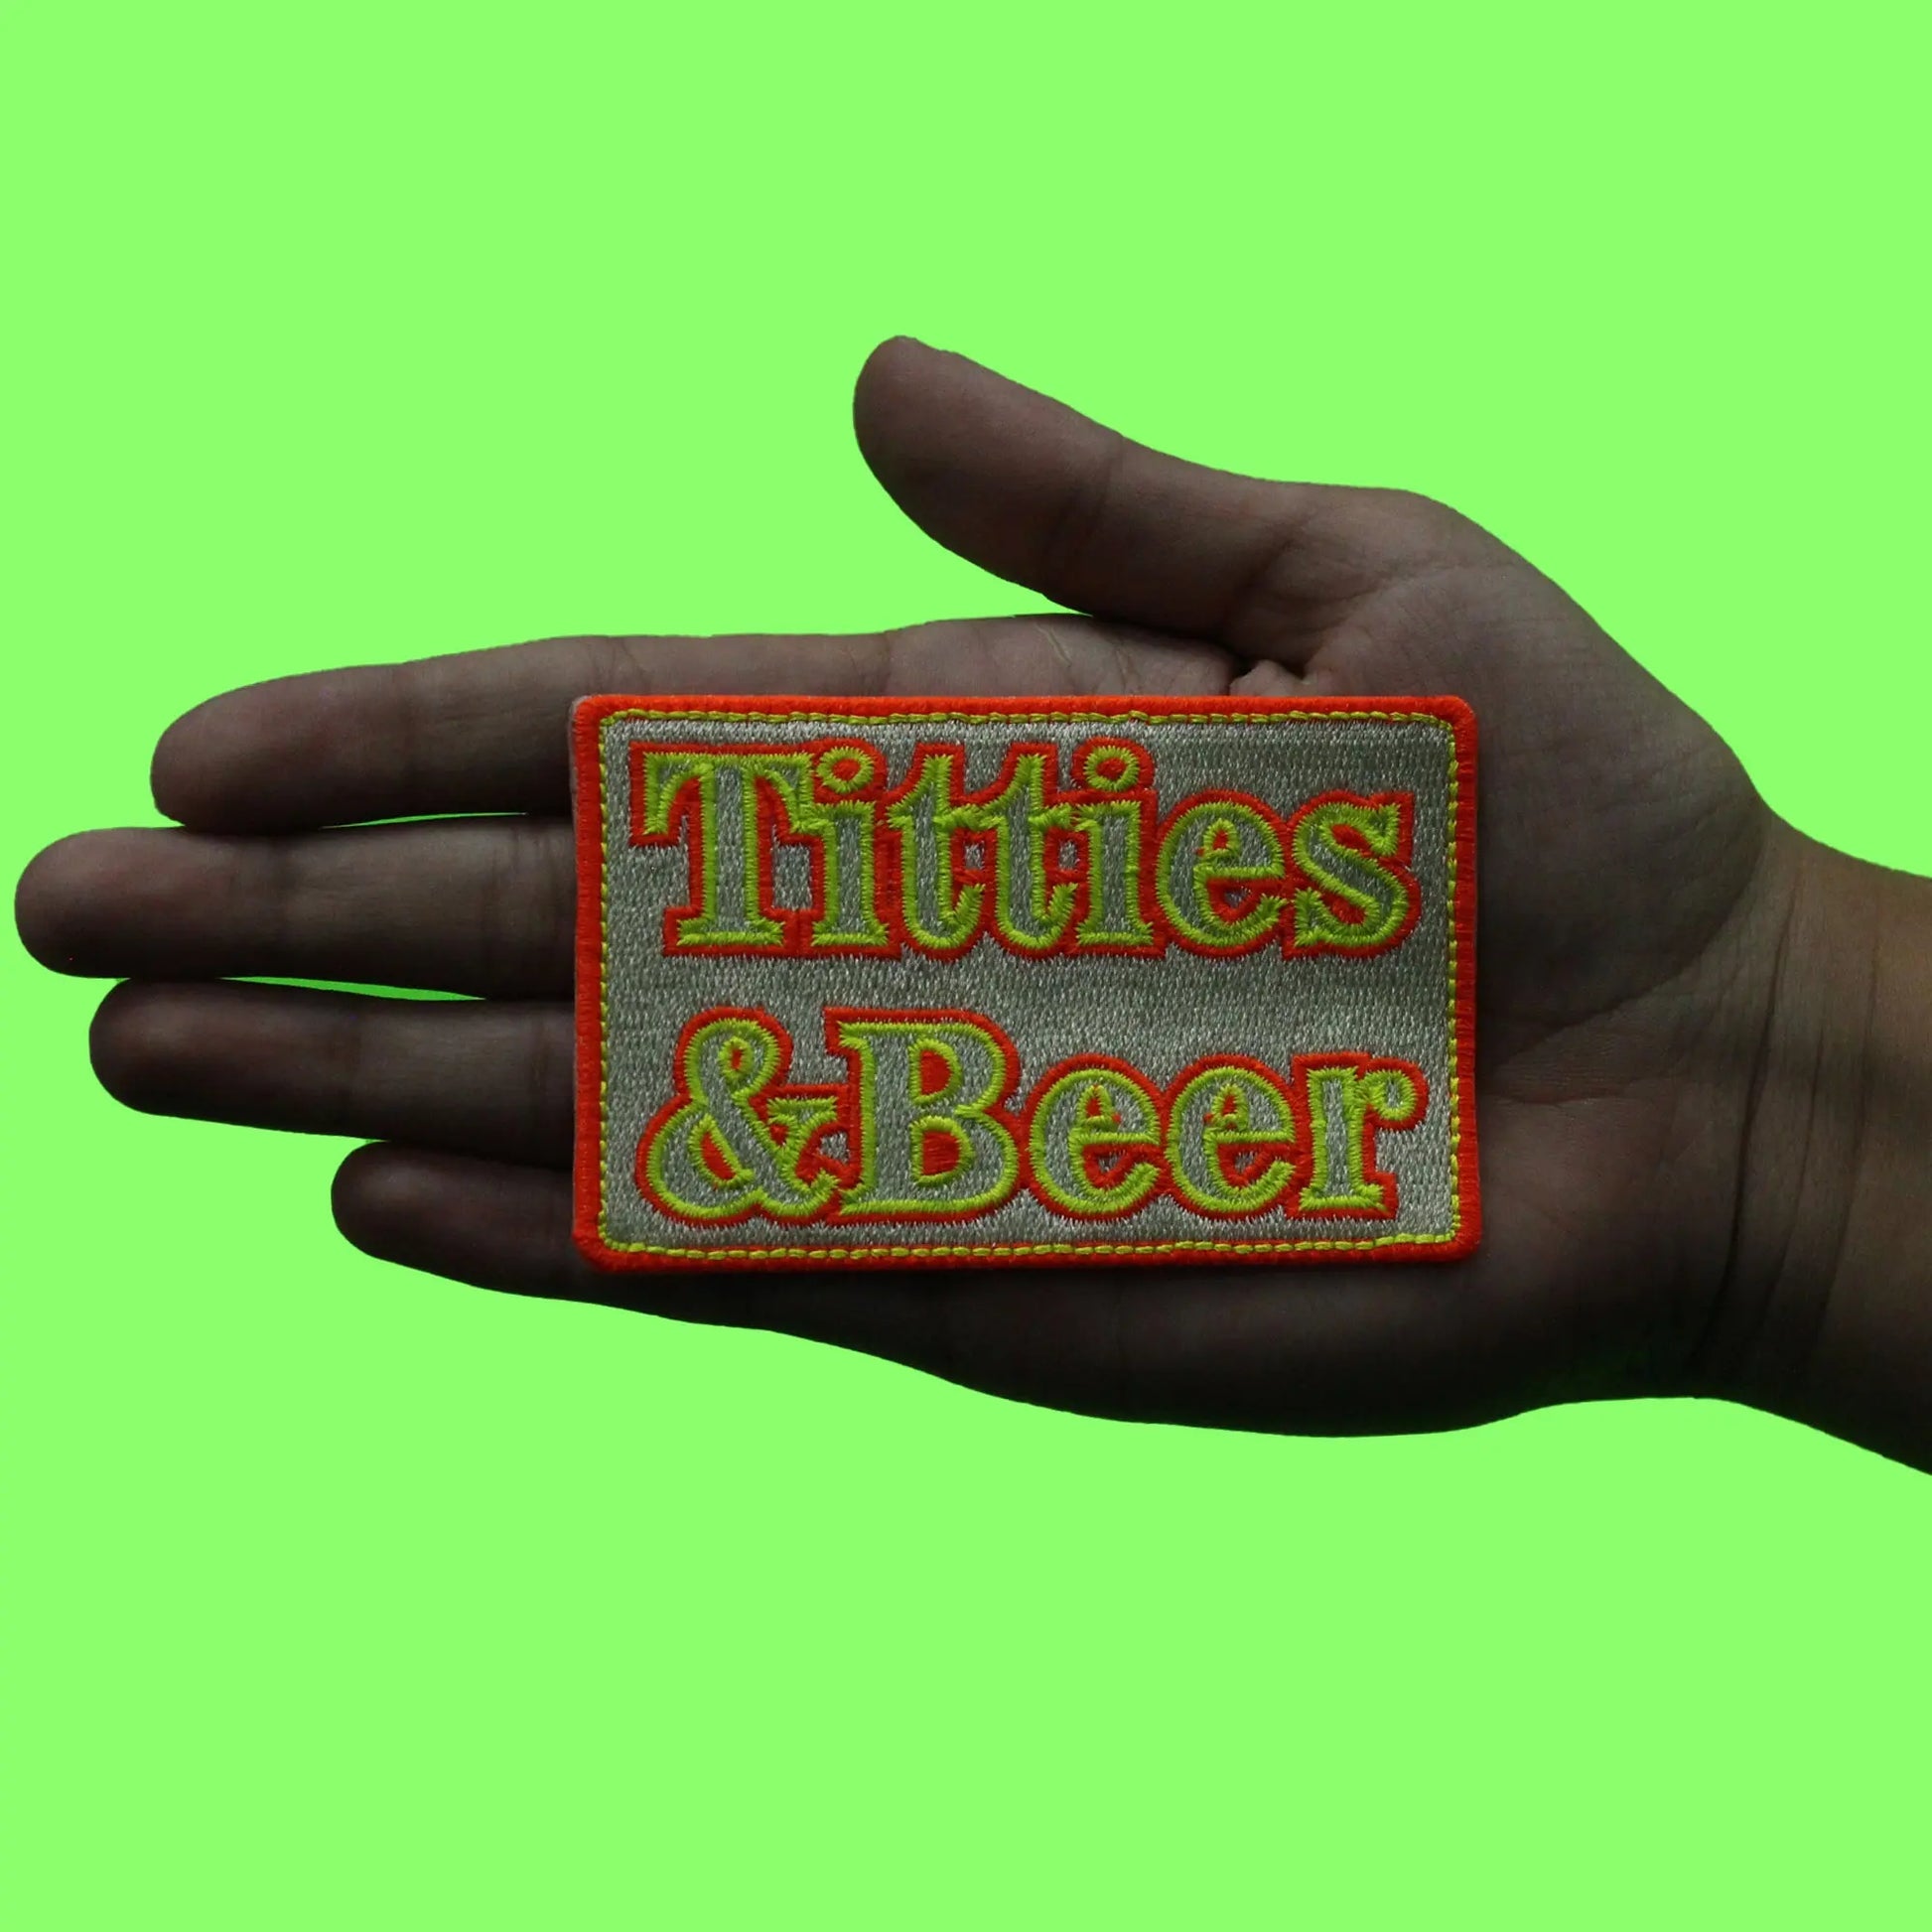 Titties And Beer Patch Neon Women Alcohol Embroidered Iron On